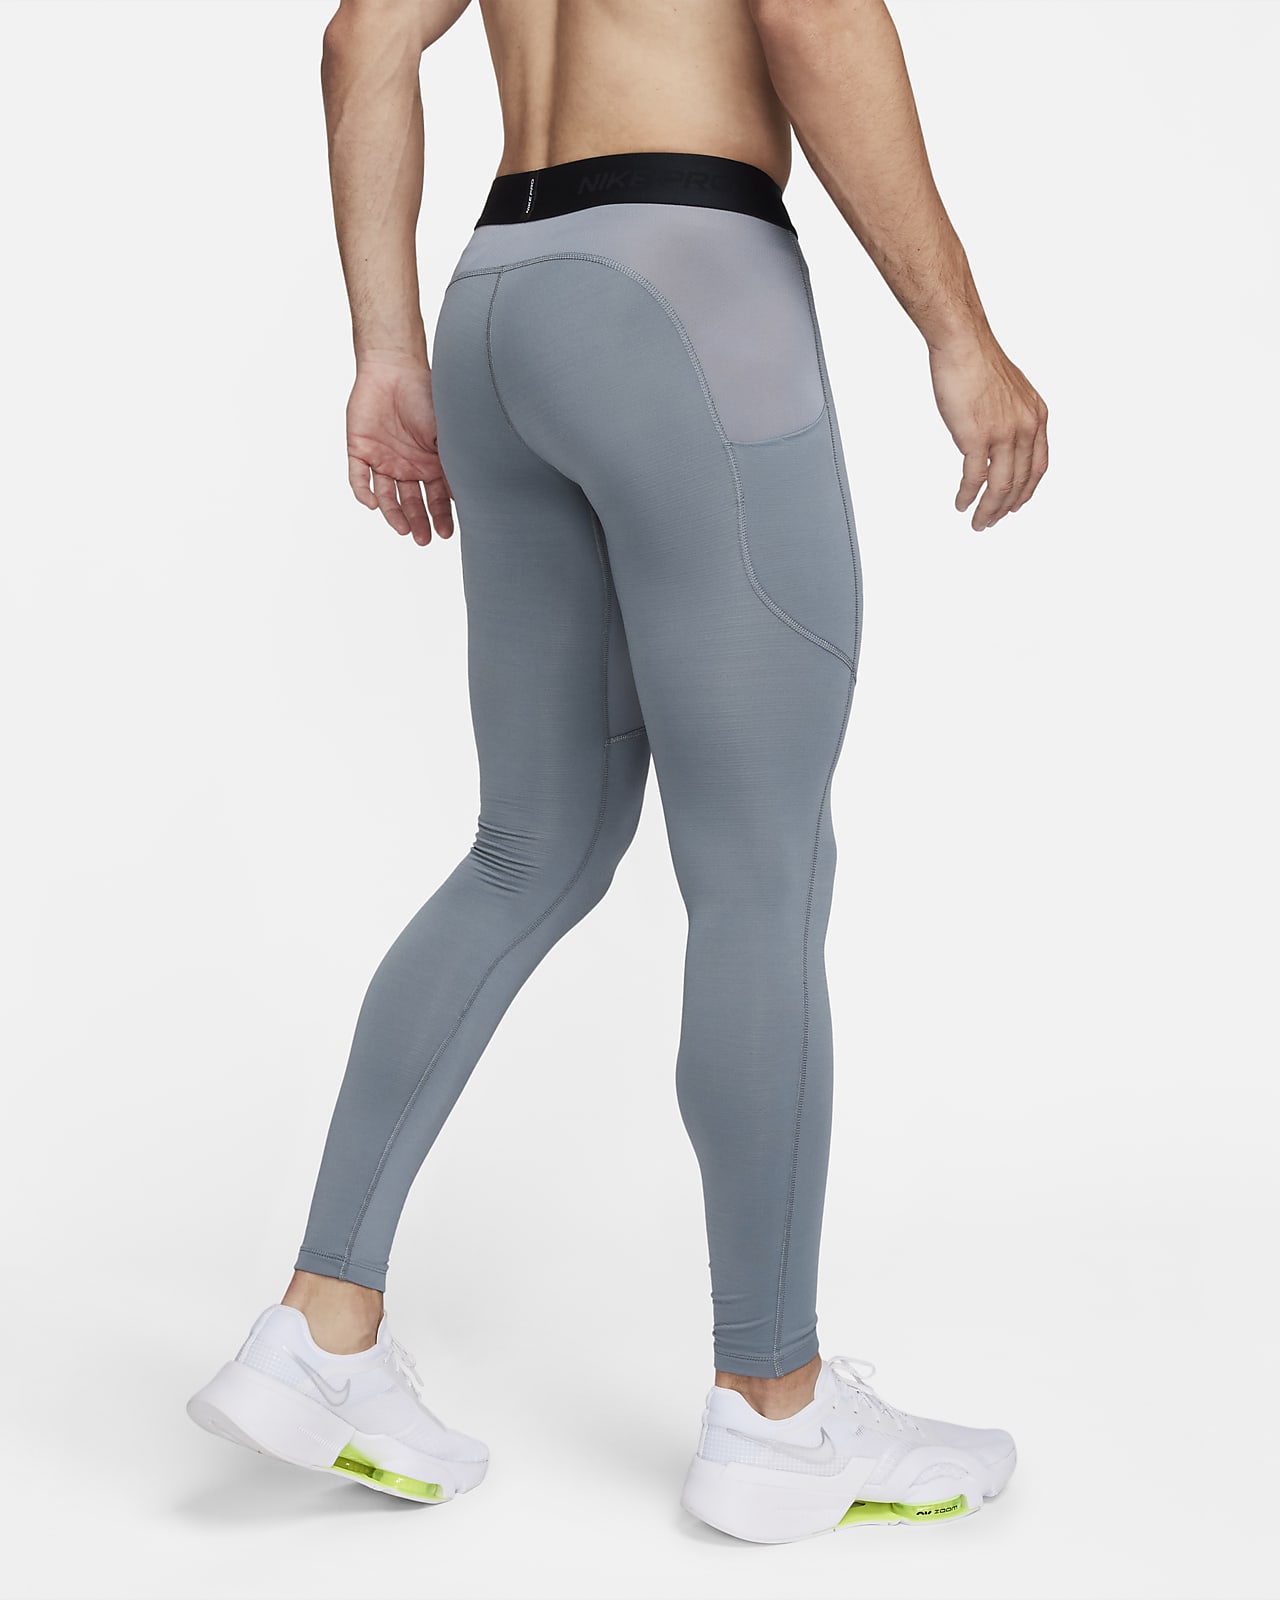 Nike Half Tights For Yoga, Gym, Fitness Black Polyester Bicycling Tighty at  Rs 120, Modinagar